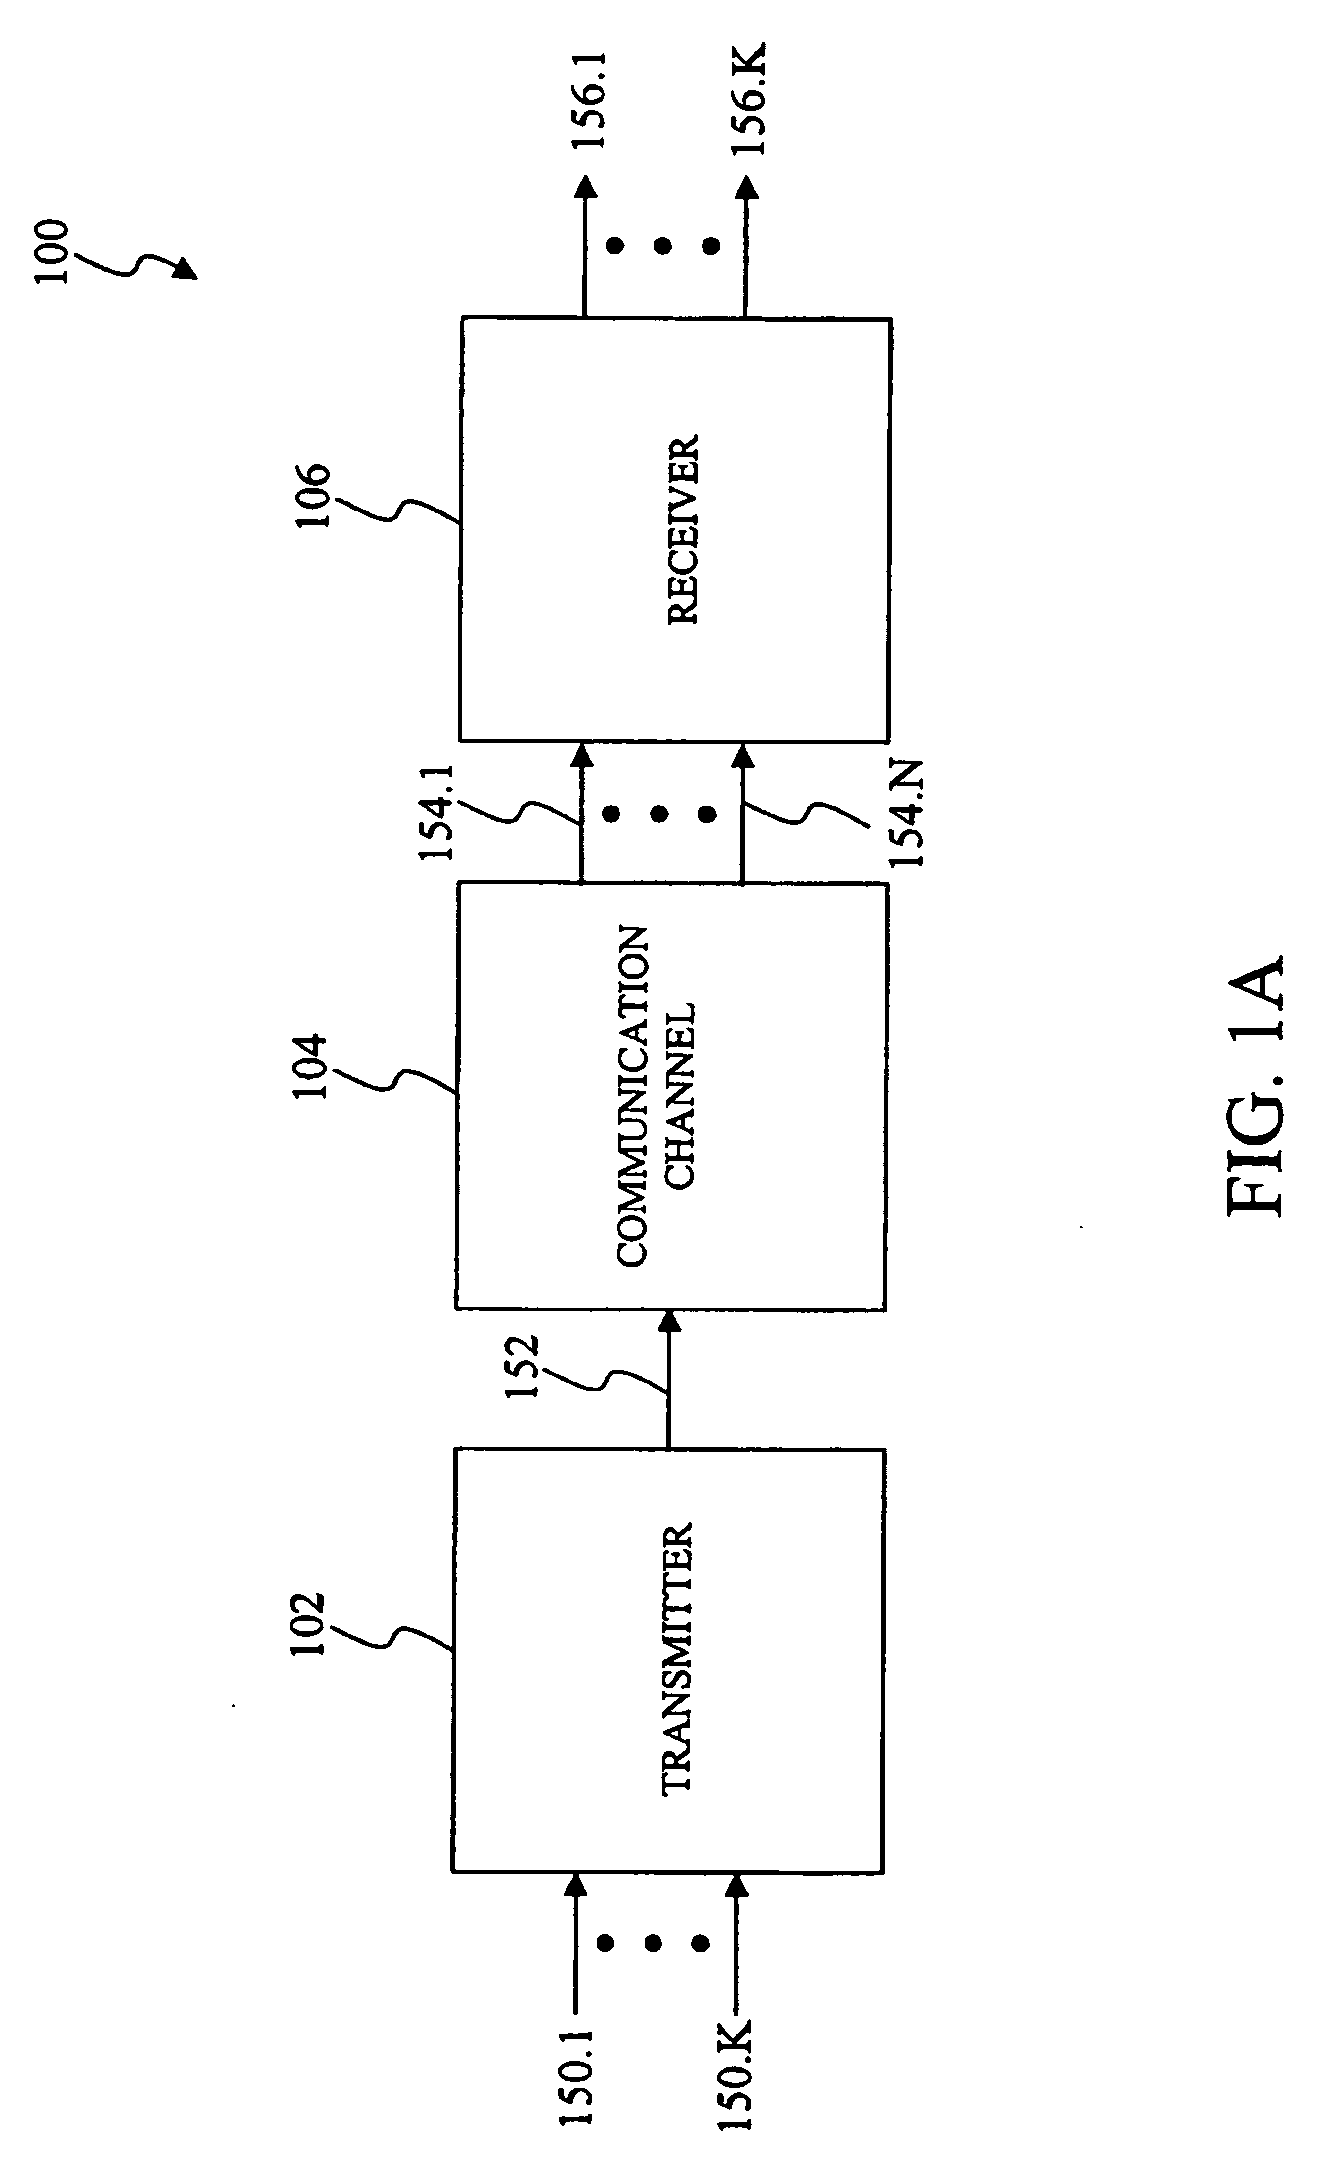 Dynamic receiver filter adjustment across preamble and information payload